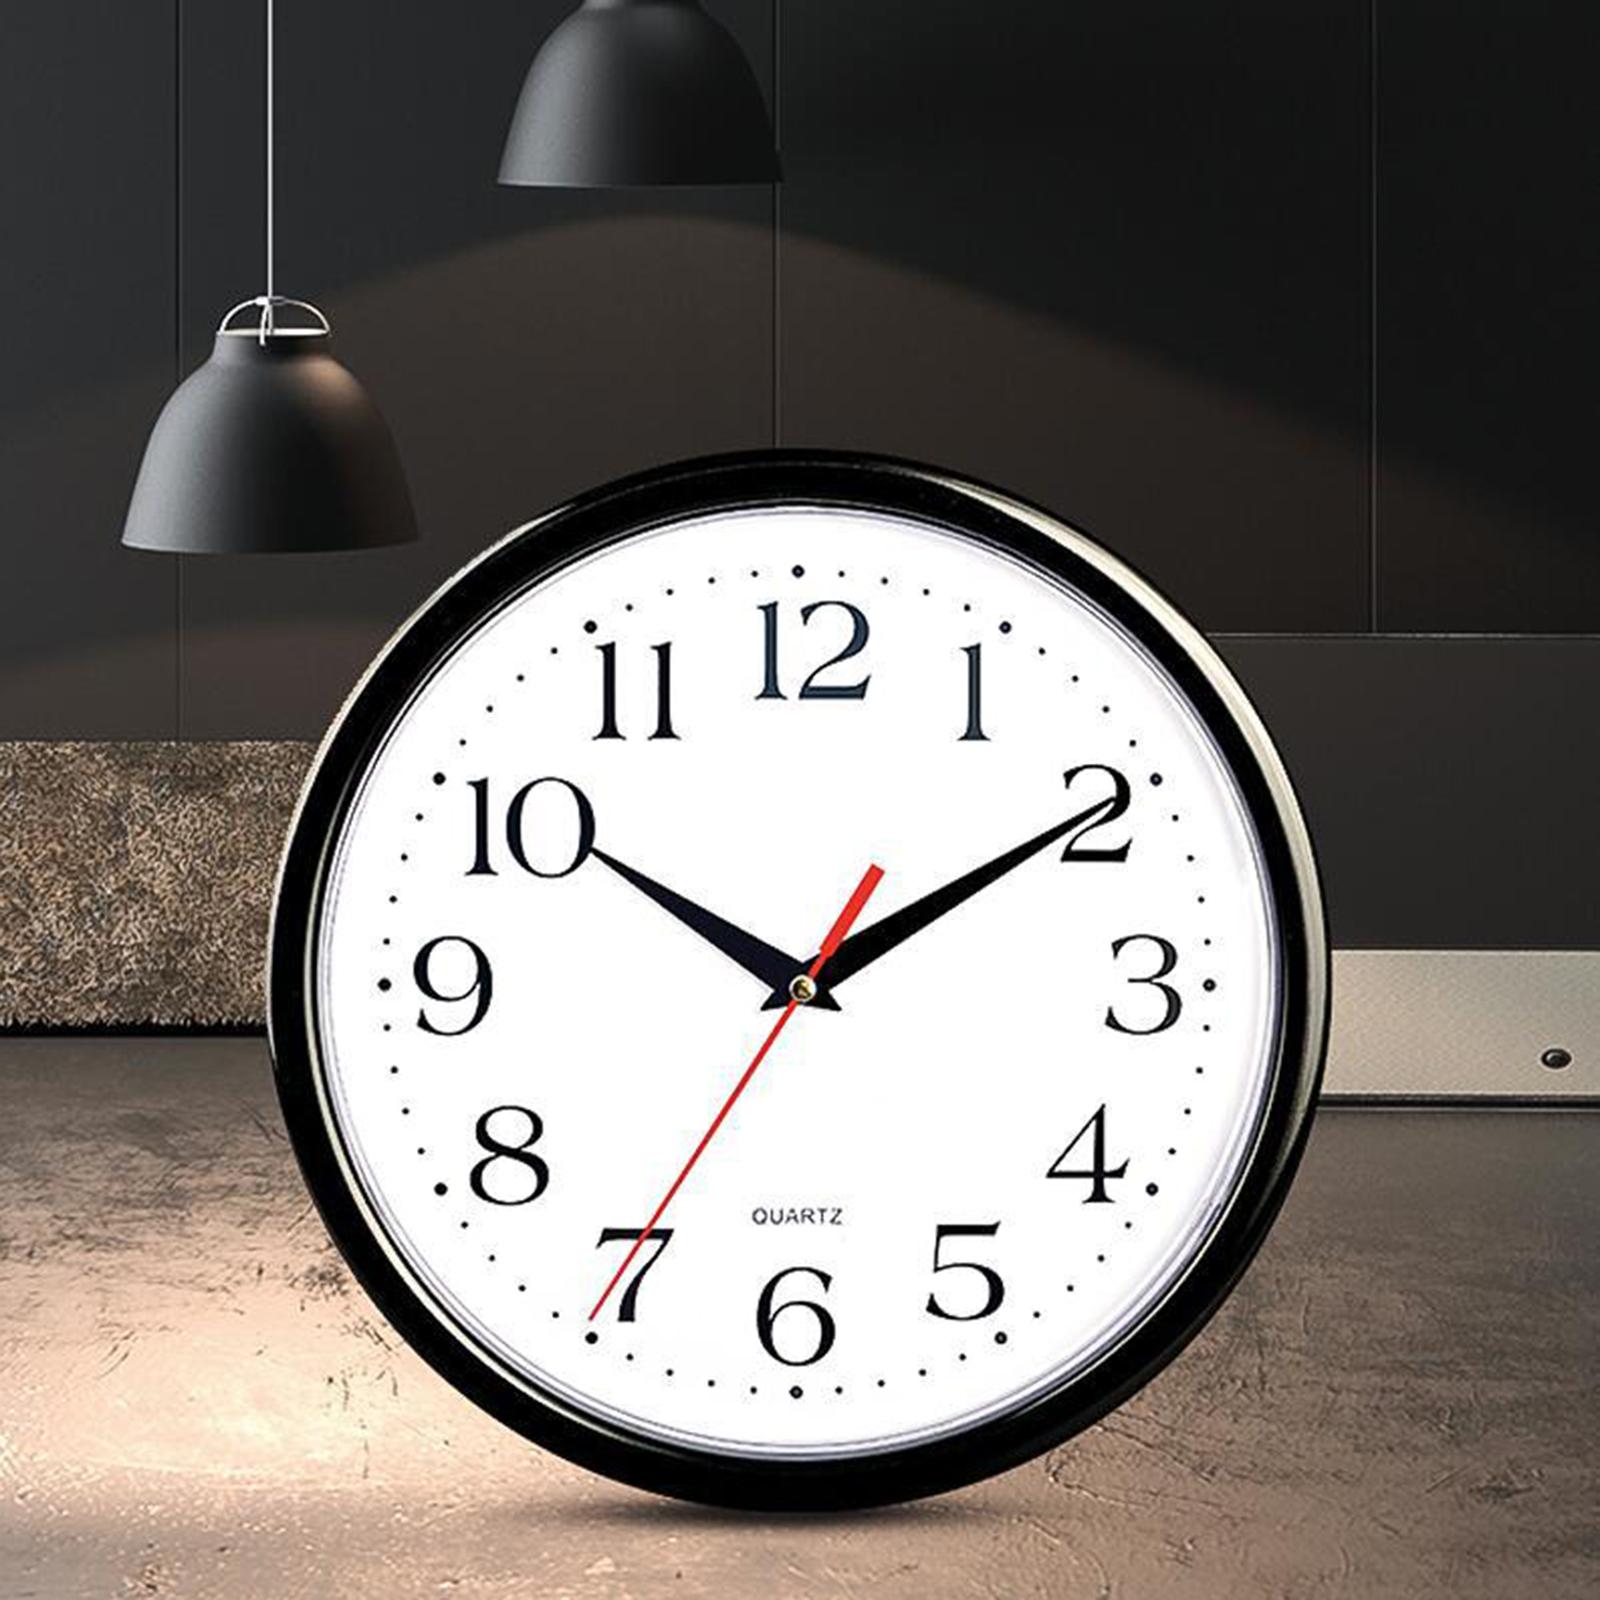 Wall Clock Decorative Digital Plastic Easy to Read for Bedroom Office Decor